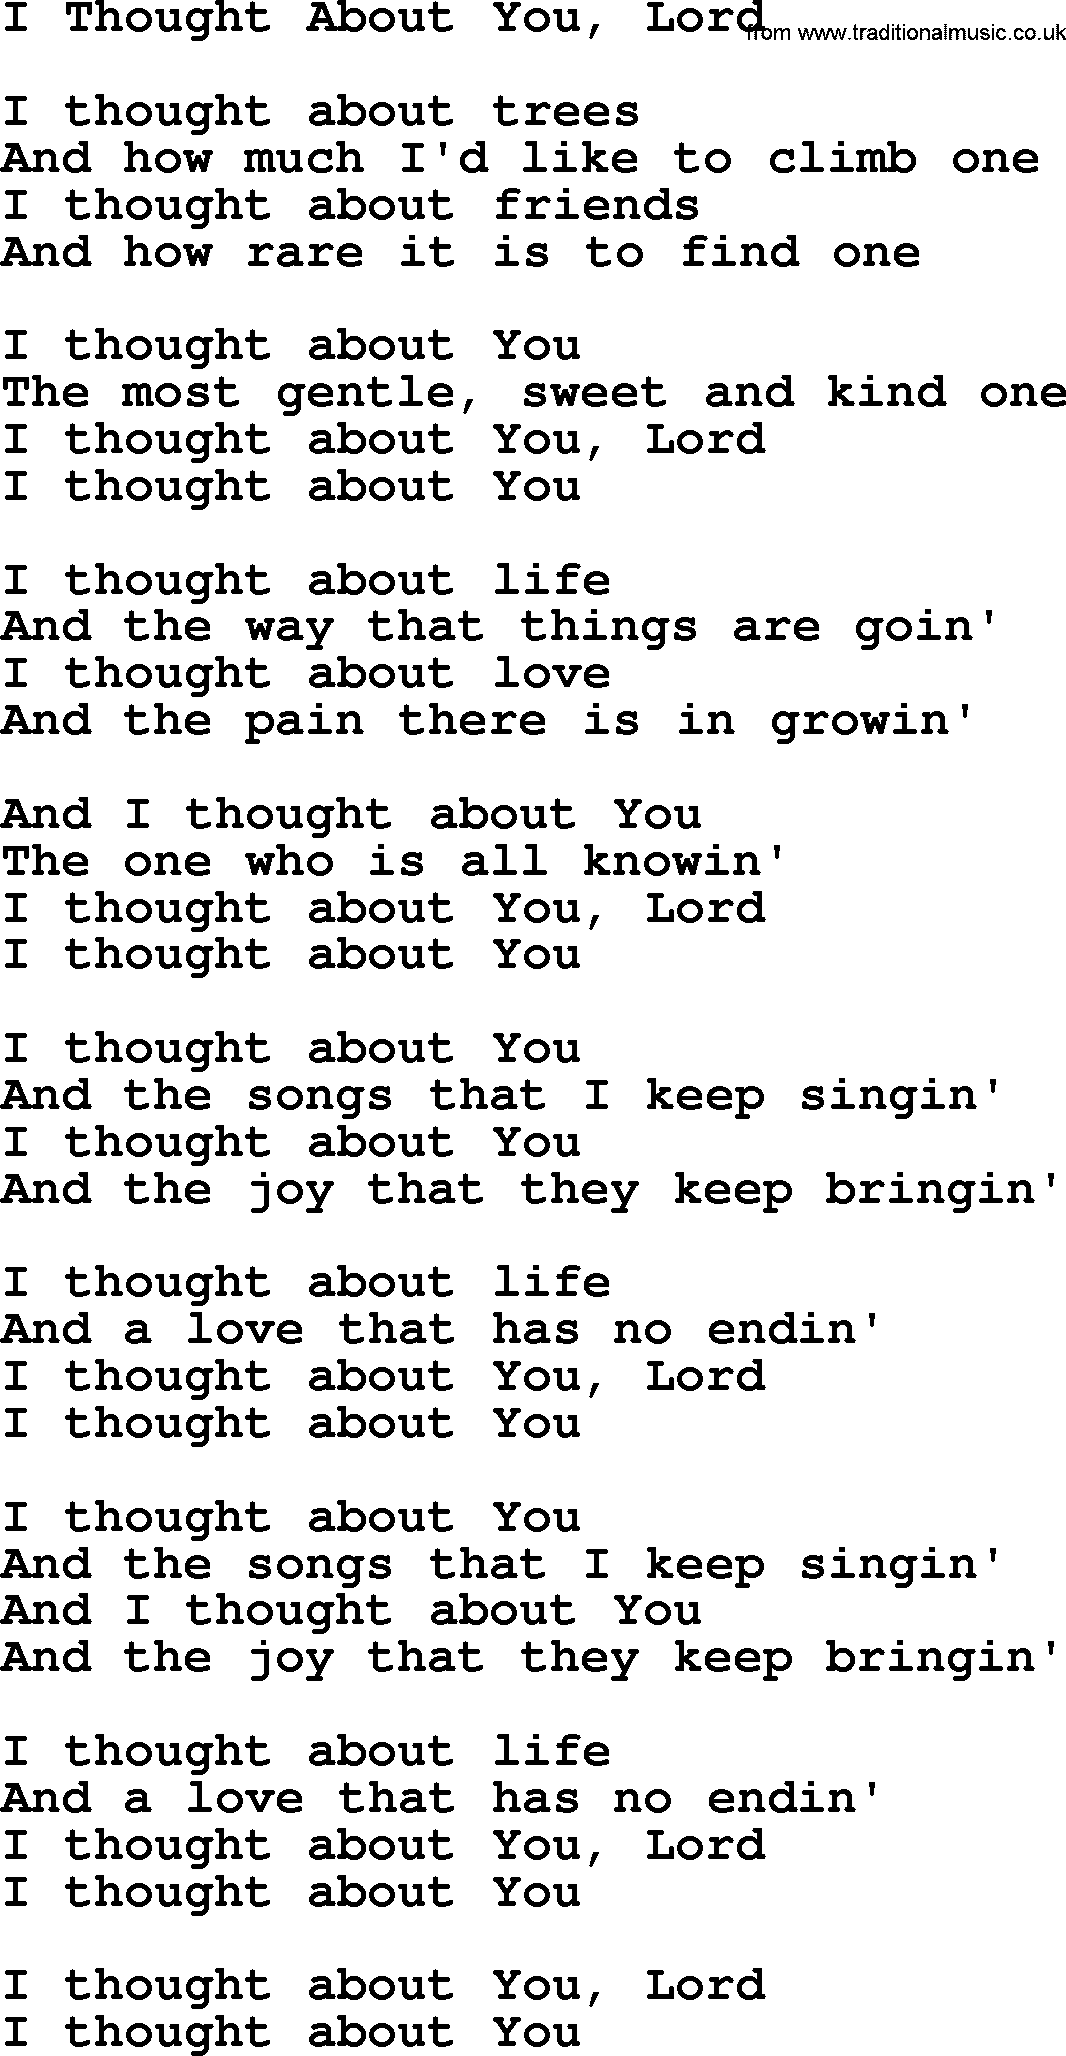 Willie Nelson song: I Thought About You, Lord lyrics